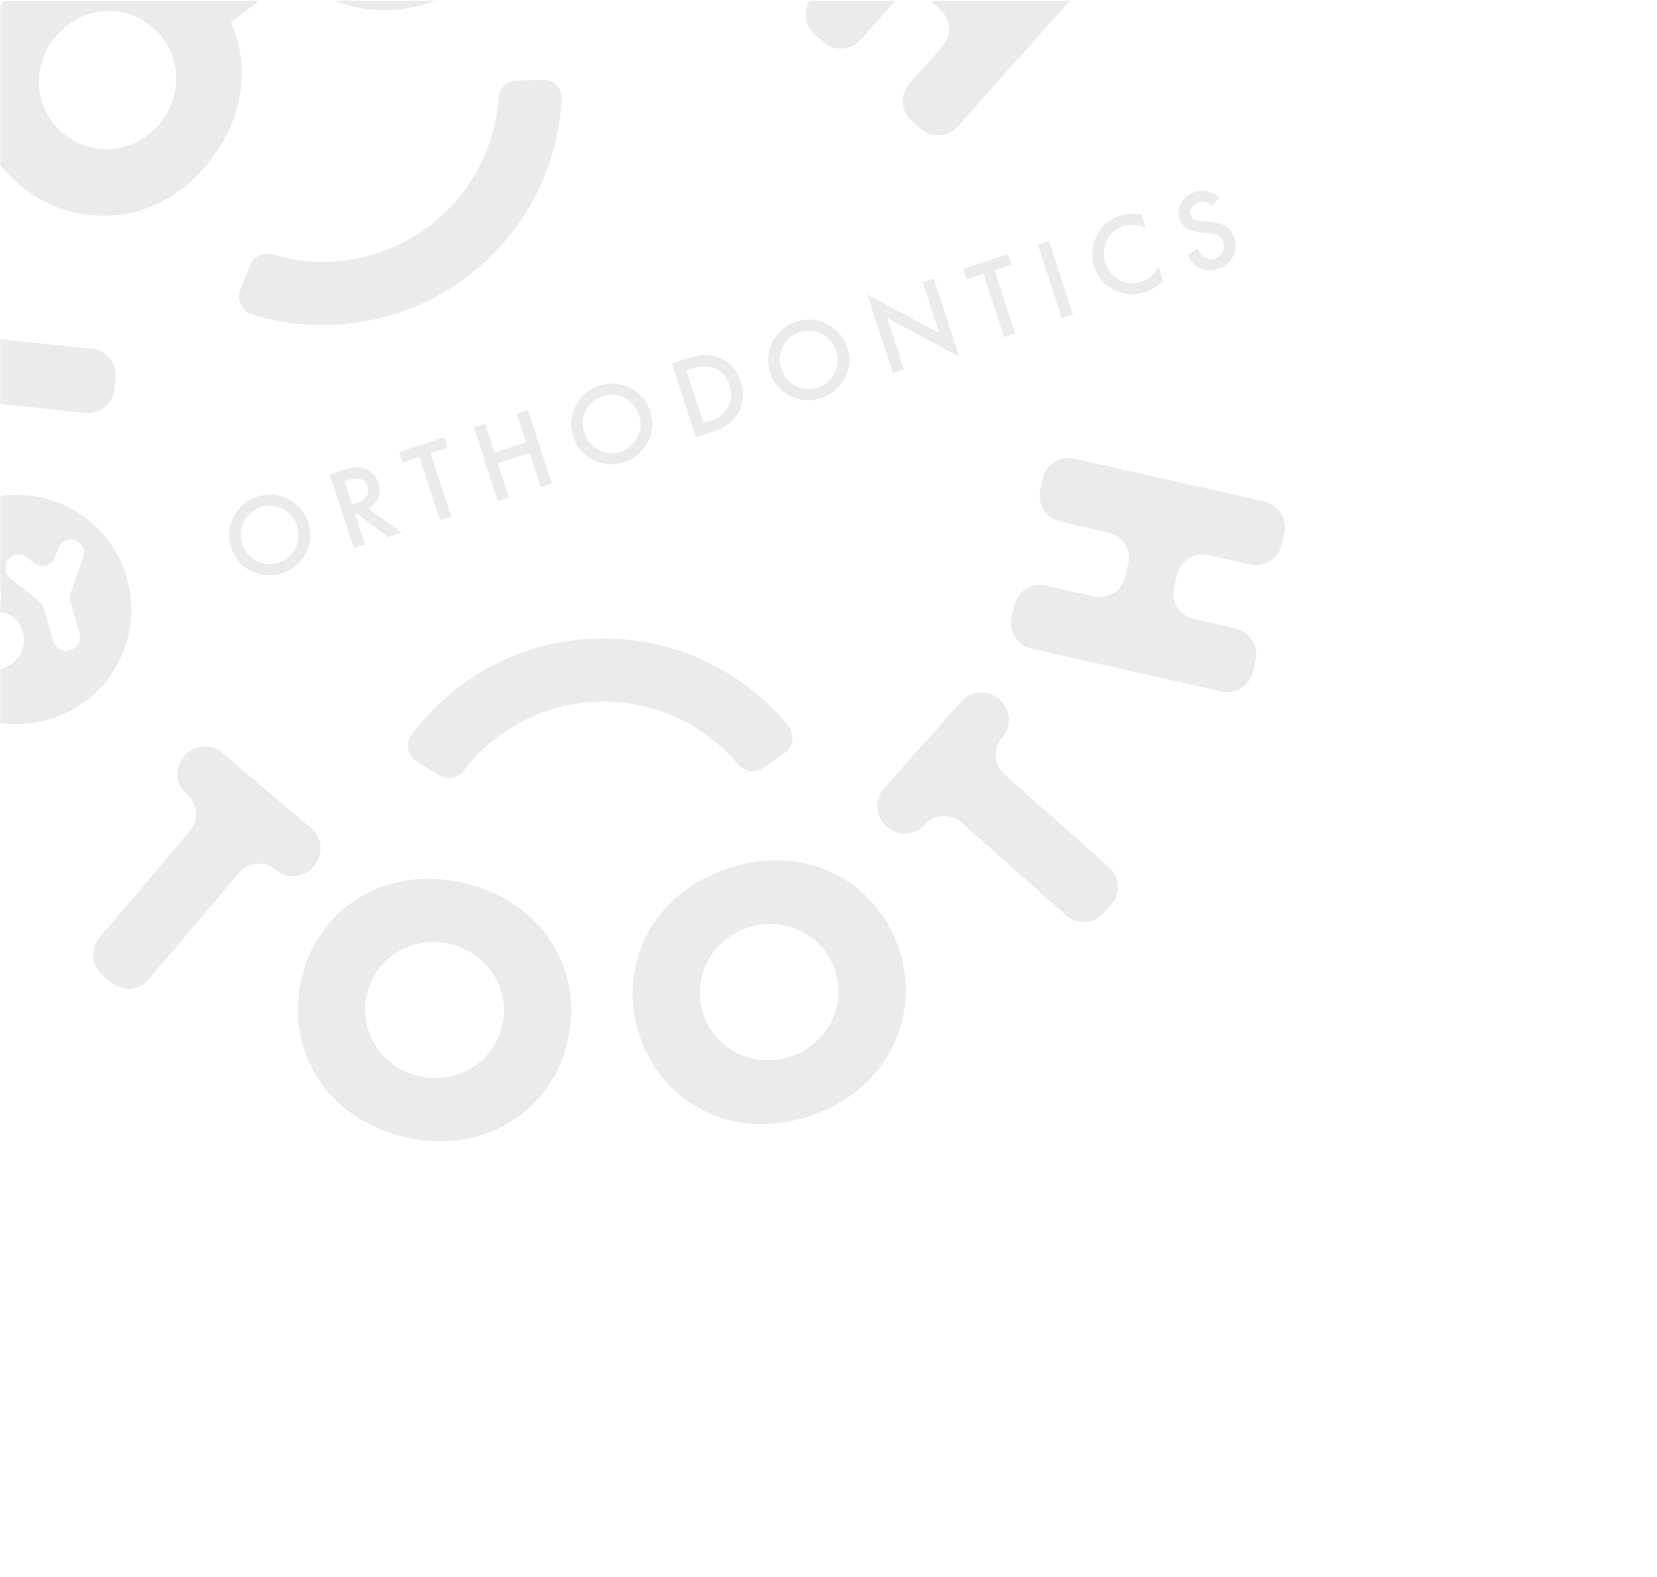 Very low opacity image of the tooth by tooth orthodontics logo